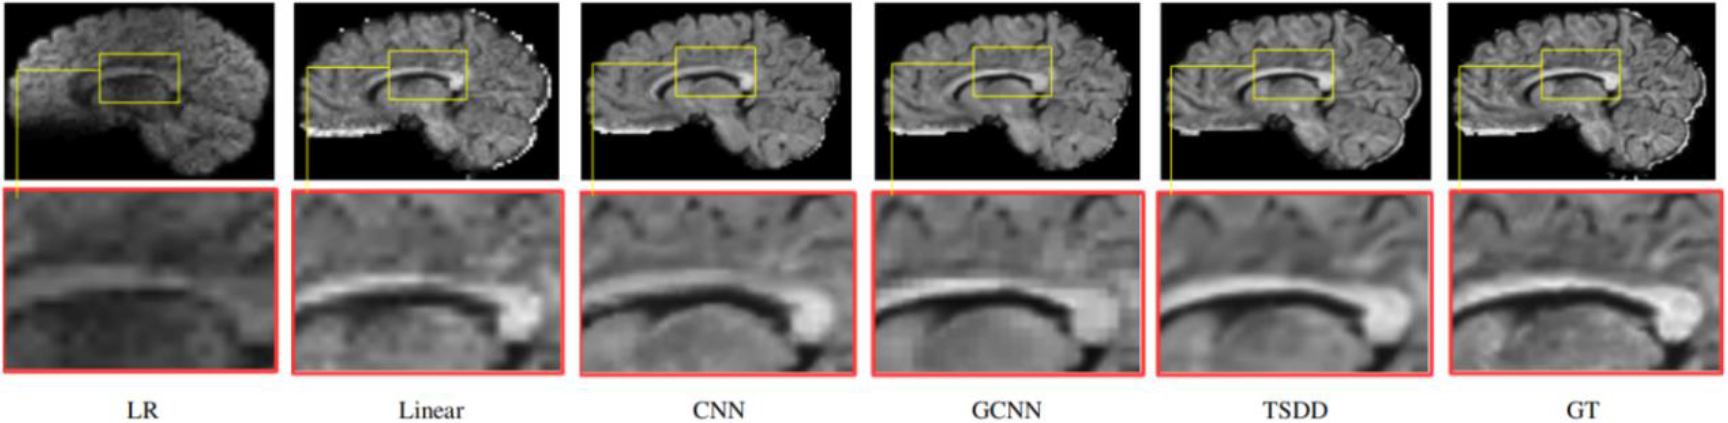 Detailed comparison of the reconstructed DWI scans.